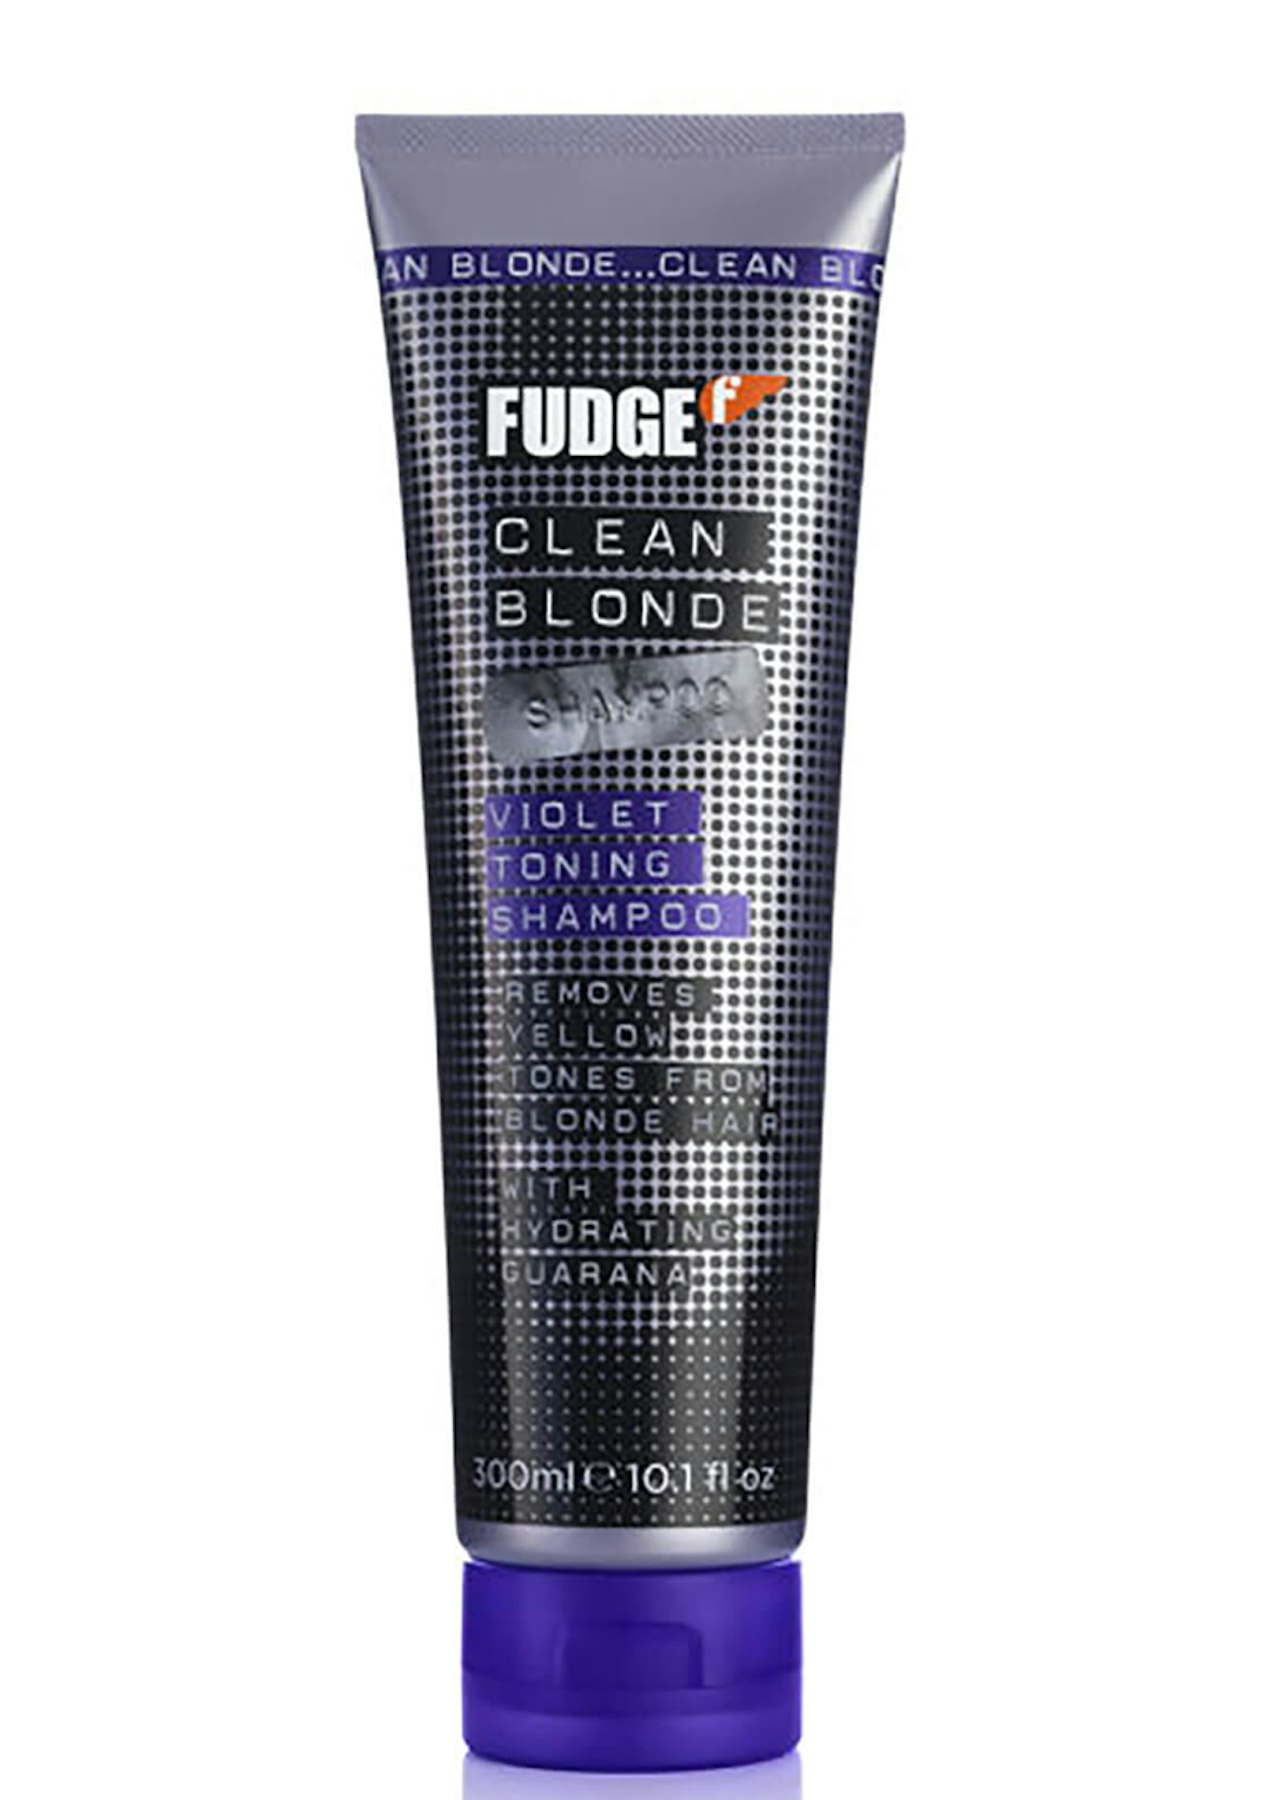 Fudge Blonde Violet Shampoo 300ml Best Selling Haircare Onceit